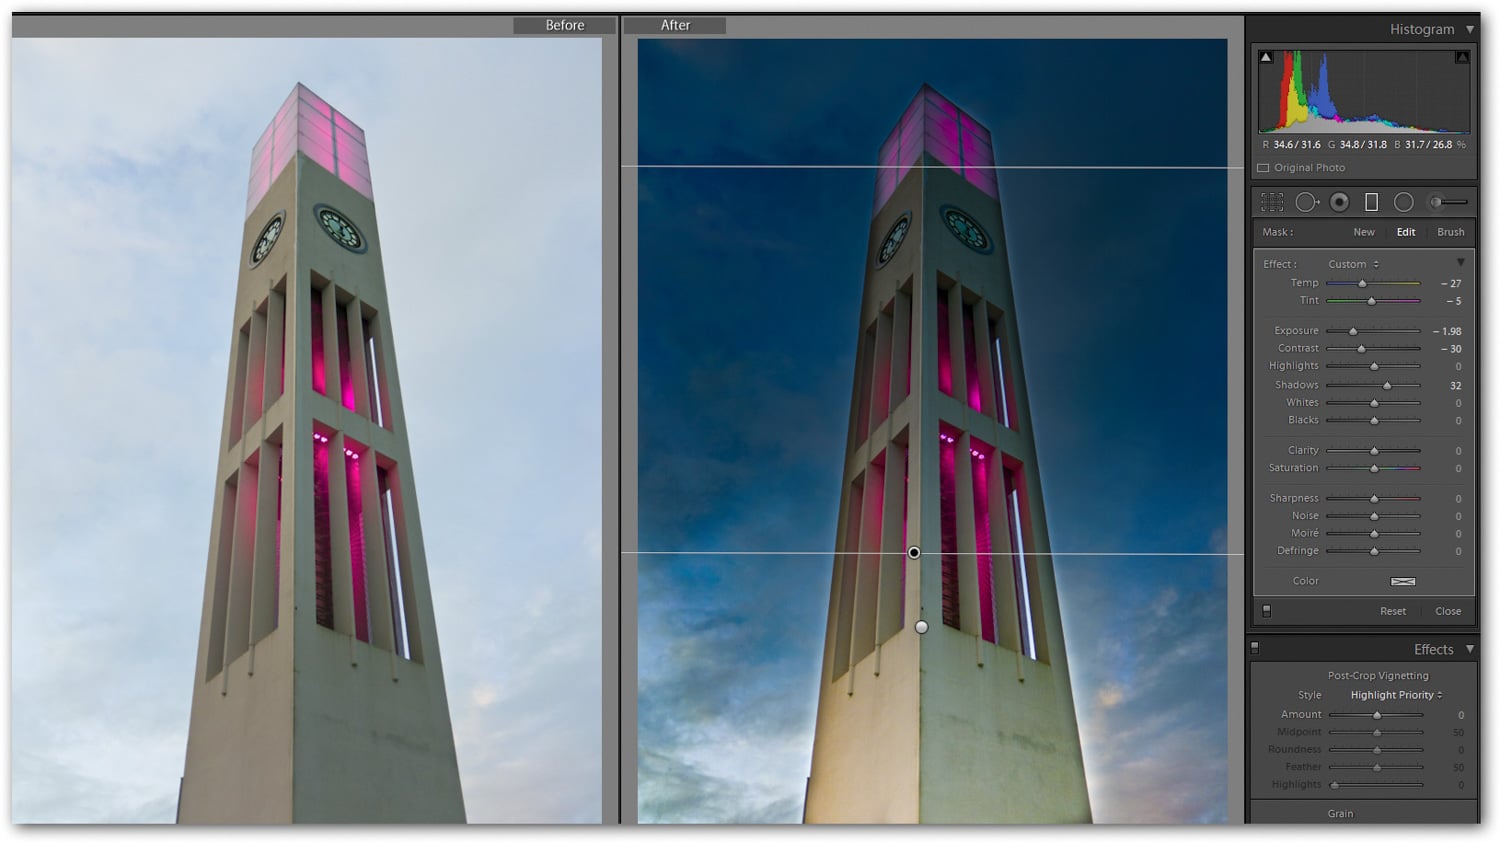 Image 6 — combining the Graduated Filter with the Adjustment Brush